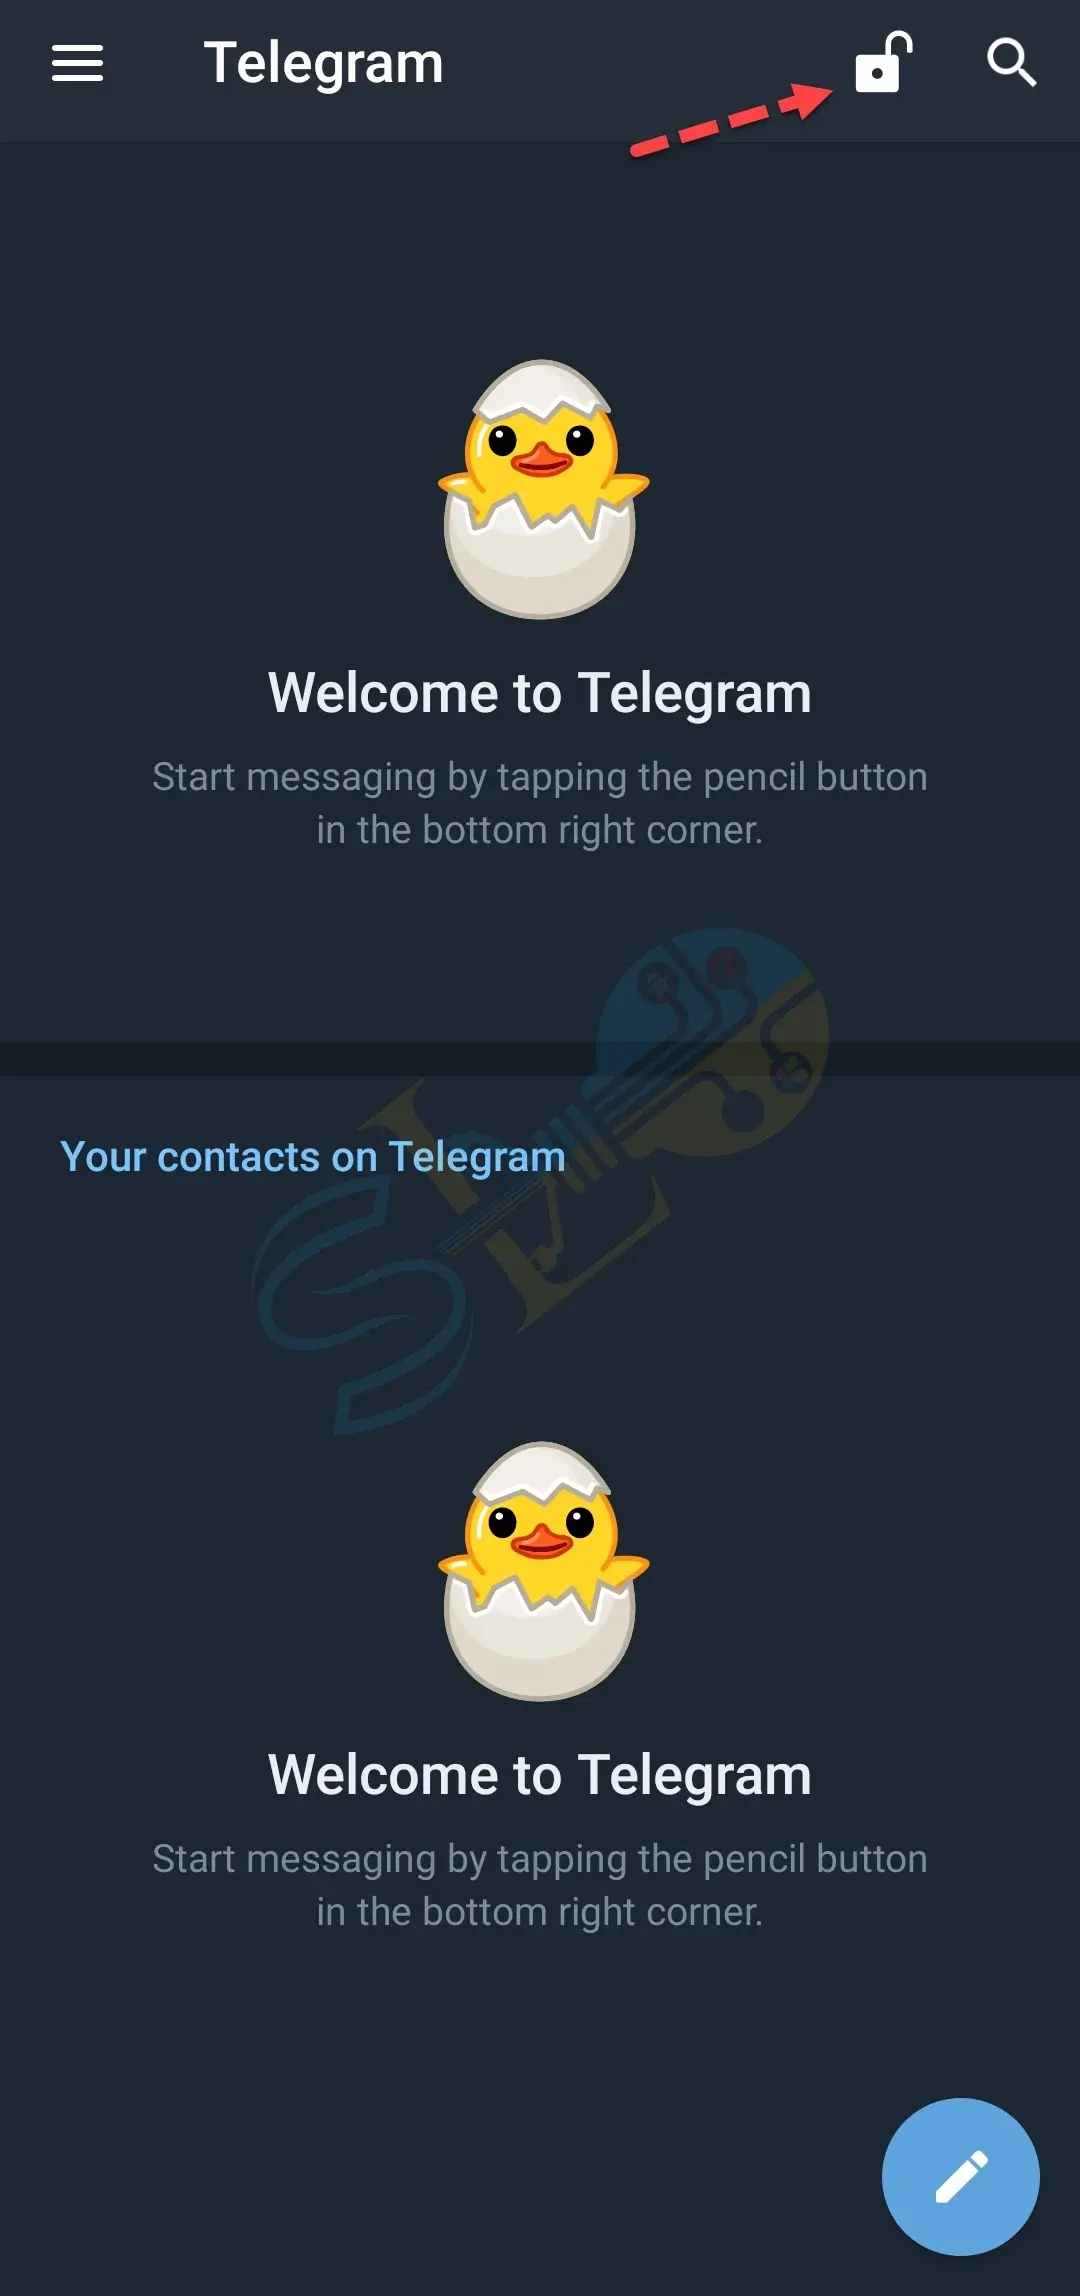 How to Set Fingerprint Lock in Telegram to Protect Chats [Android]